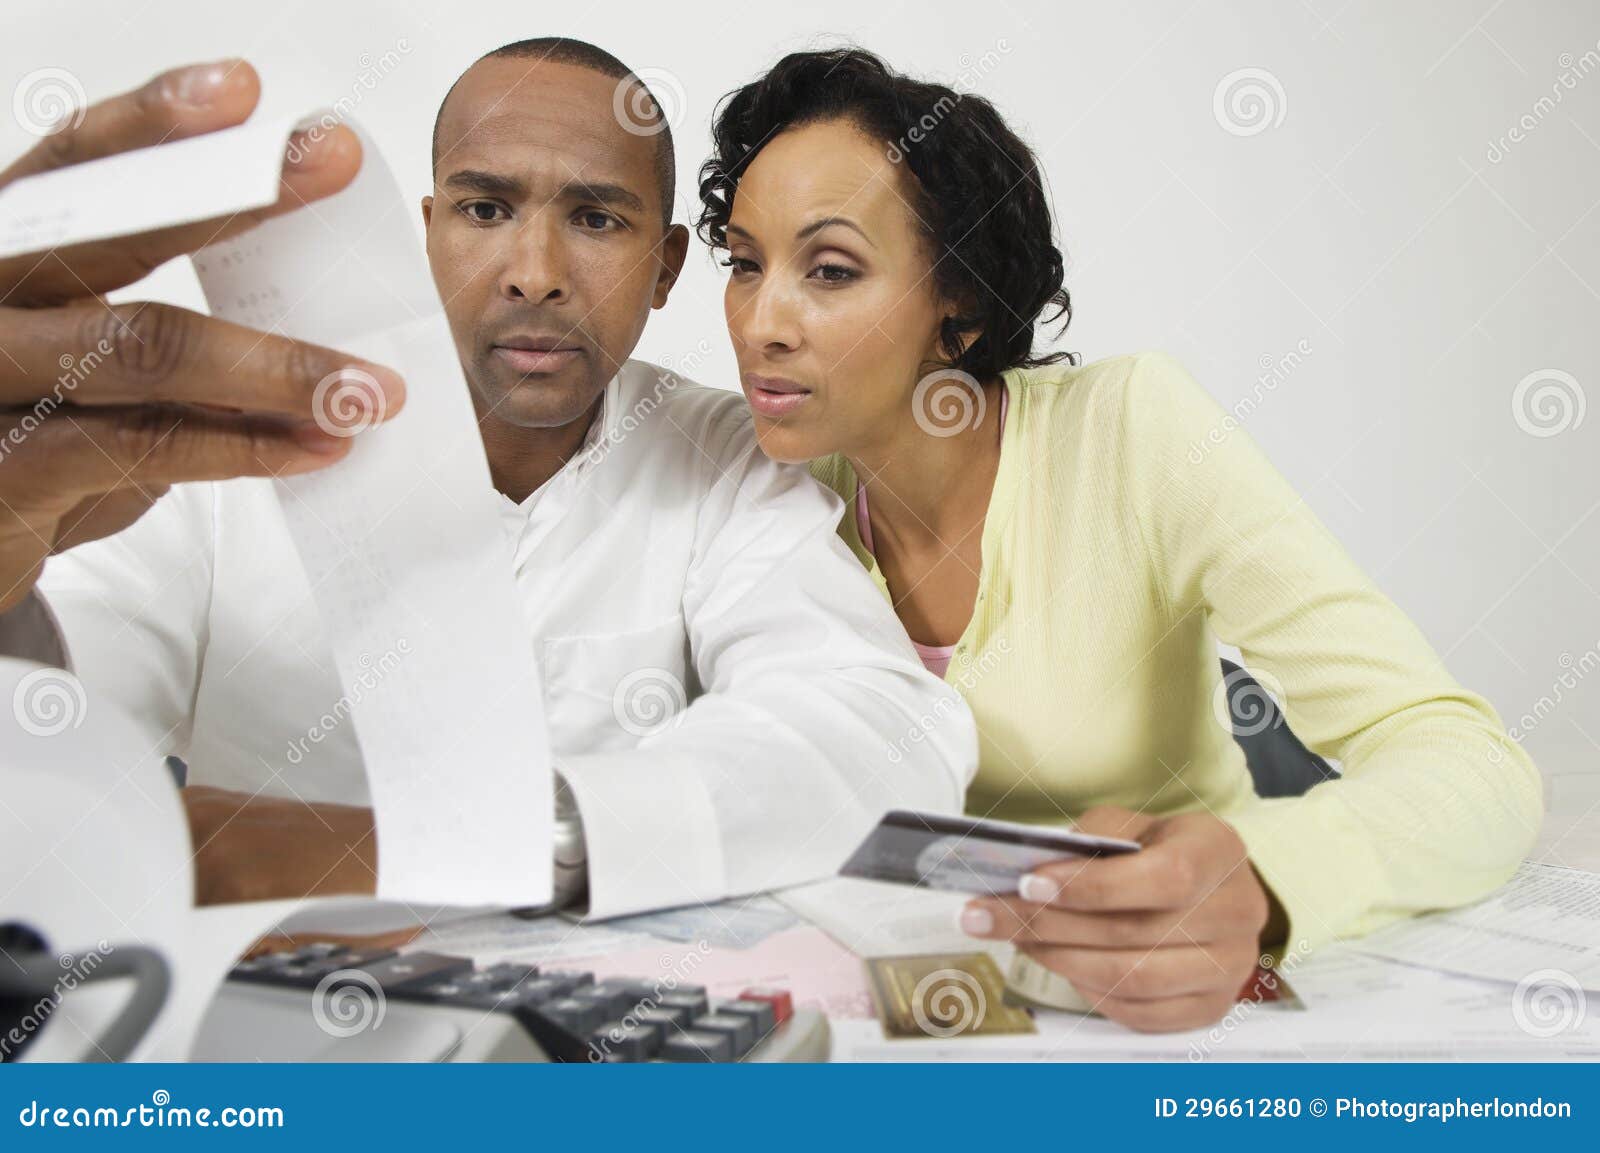 couple looking at expense receipt at home